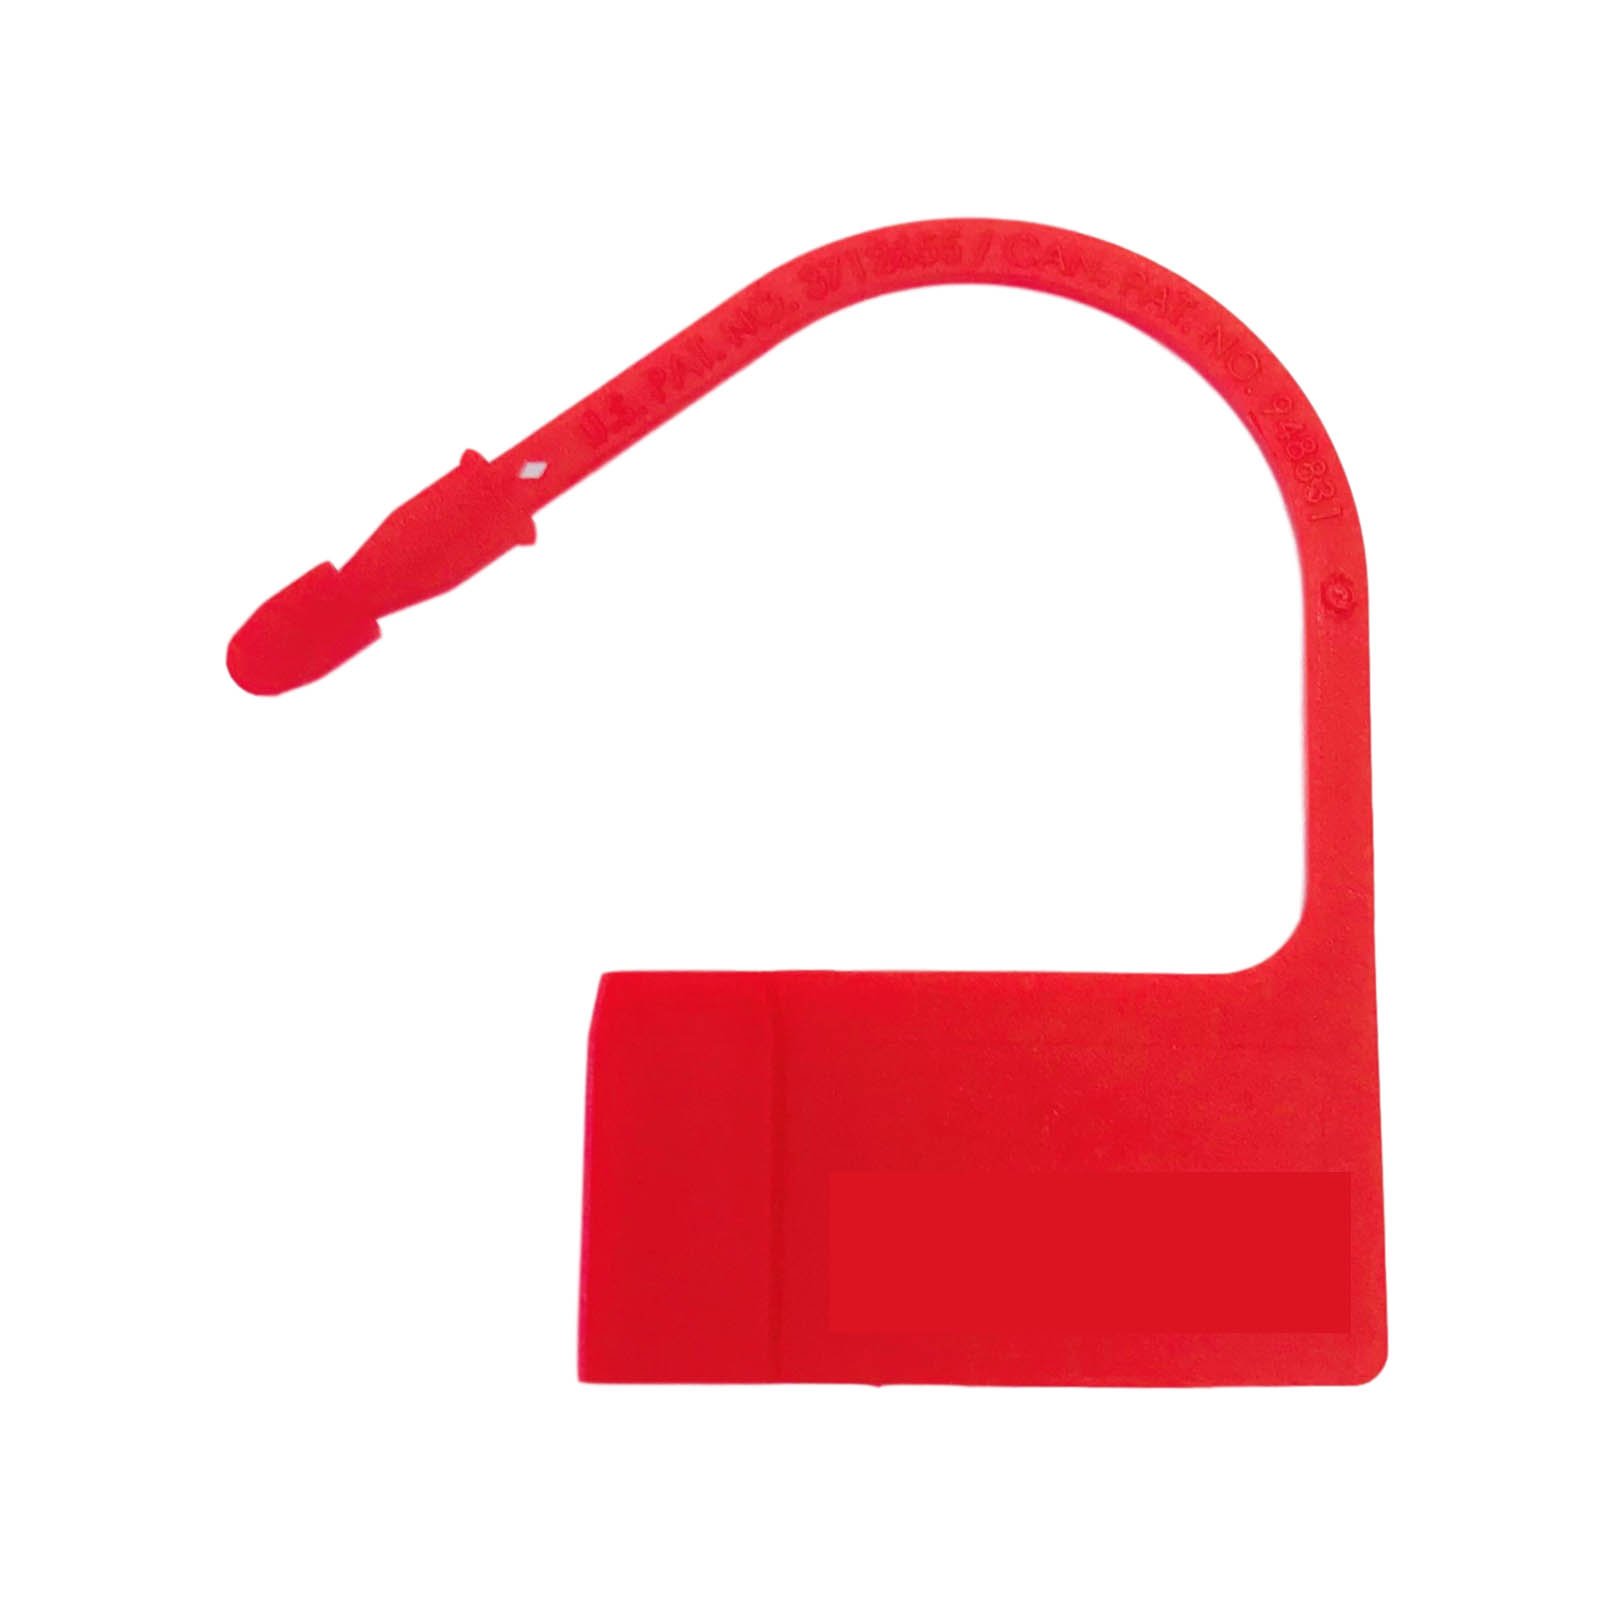 Safety Control Seal without Numbers - Red Plastic